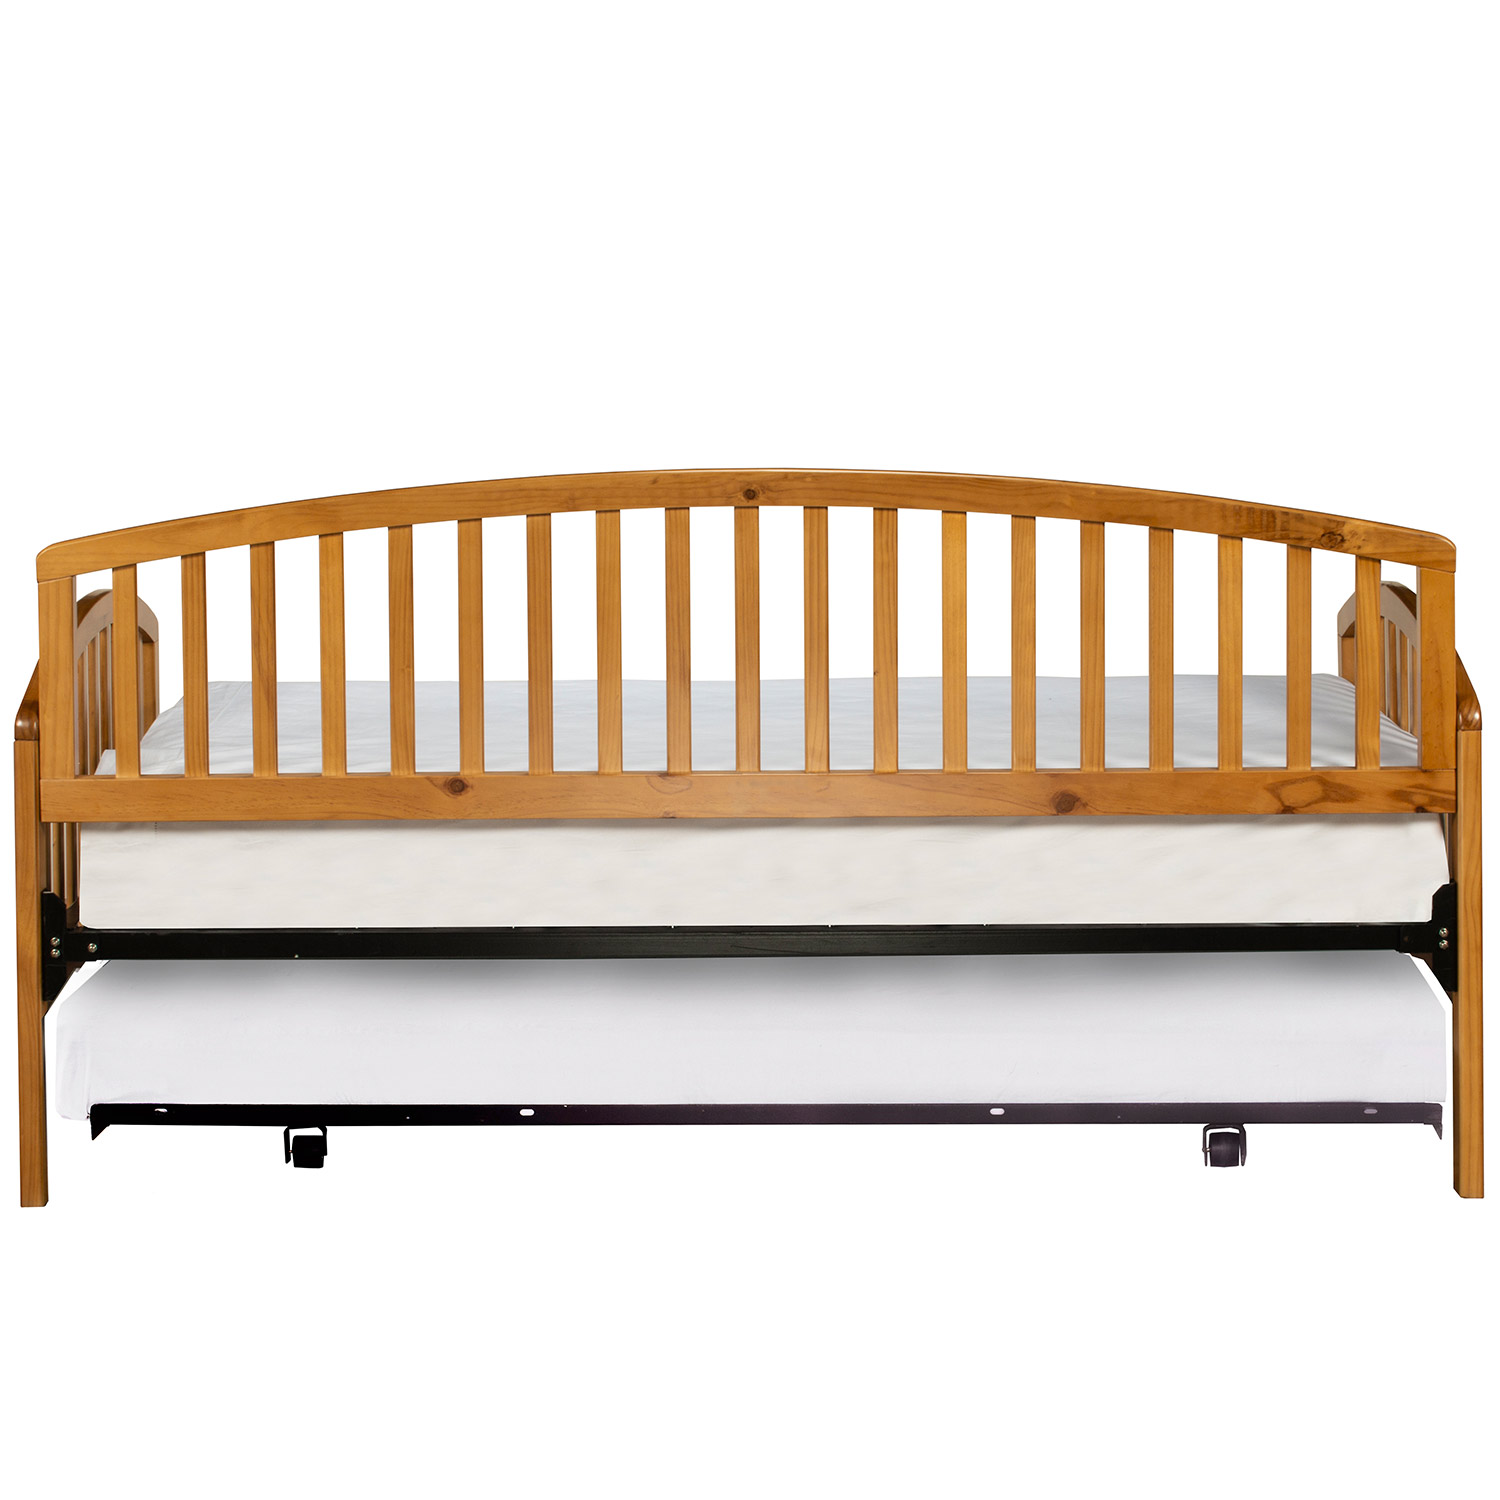 Hillsdale Carolina Daybed with Roll Out Trundle Unit - Country Pine